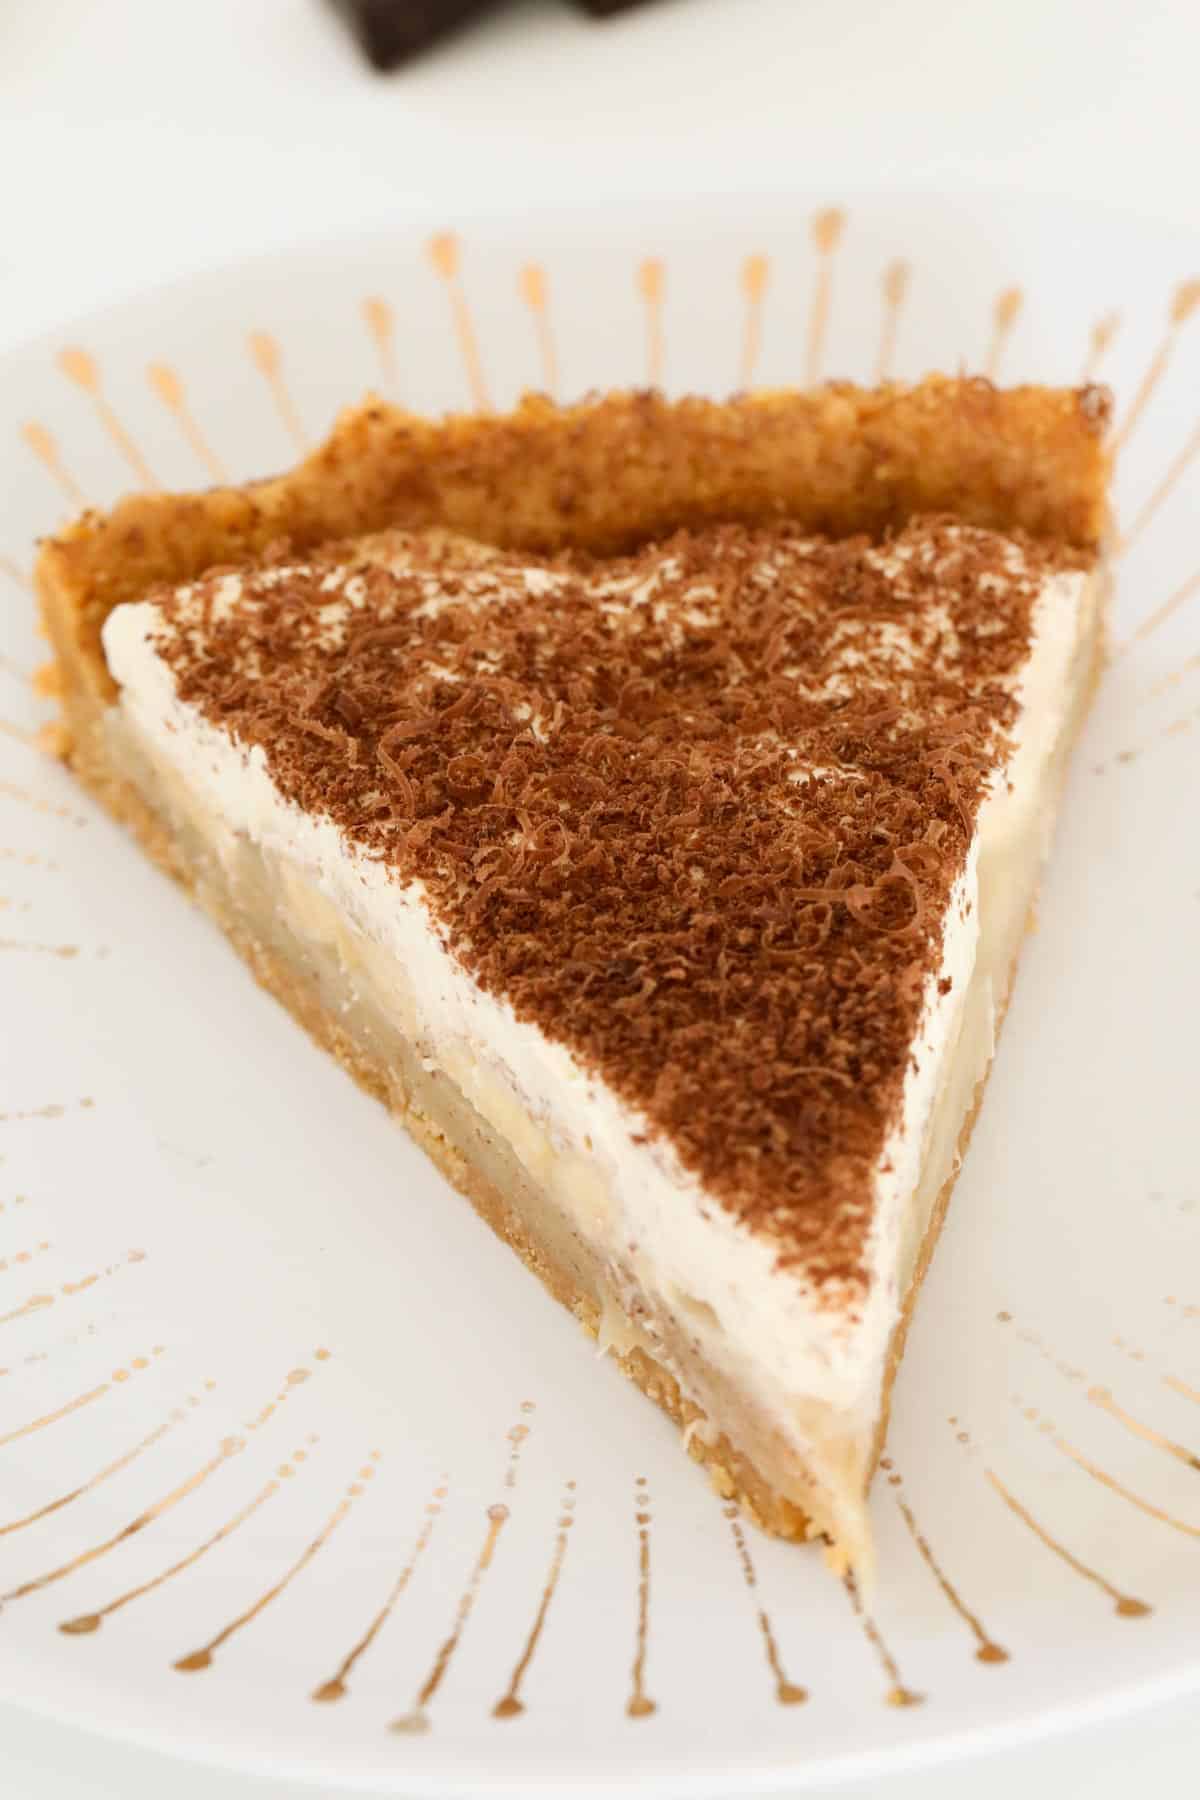 A serve of caramel pie sprinkled with grated chocolate on a white plate.